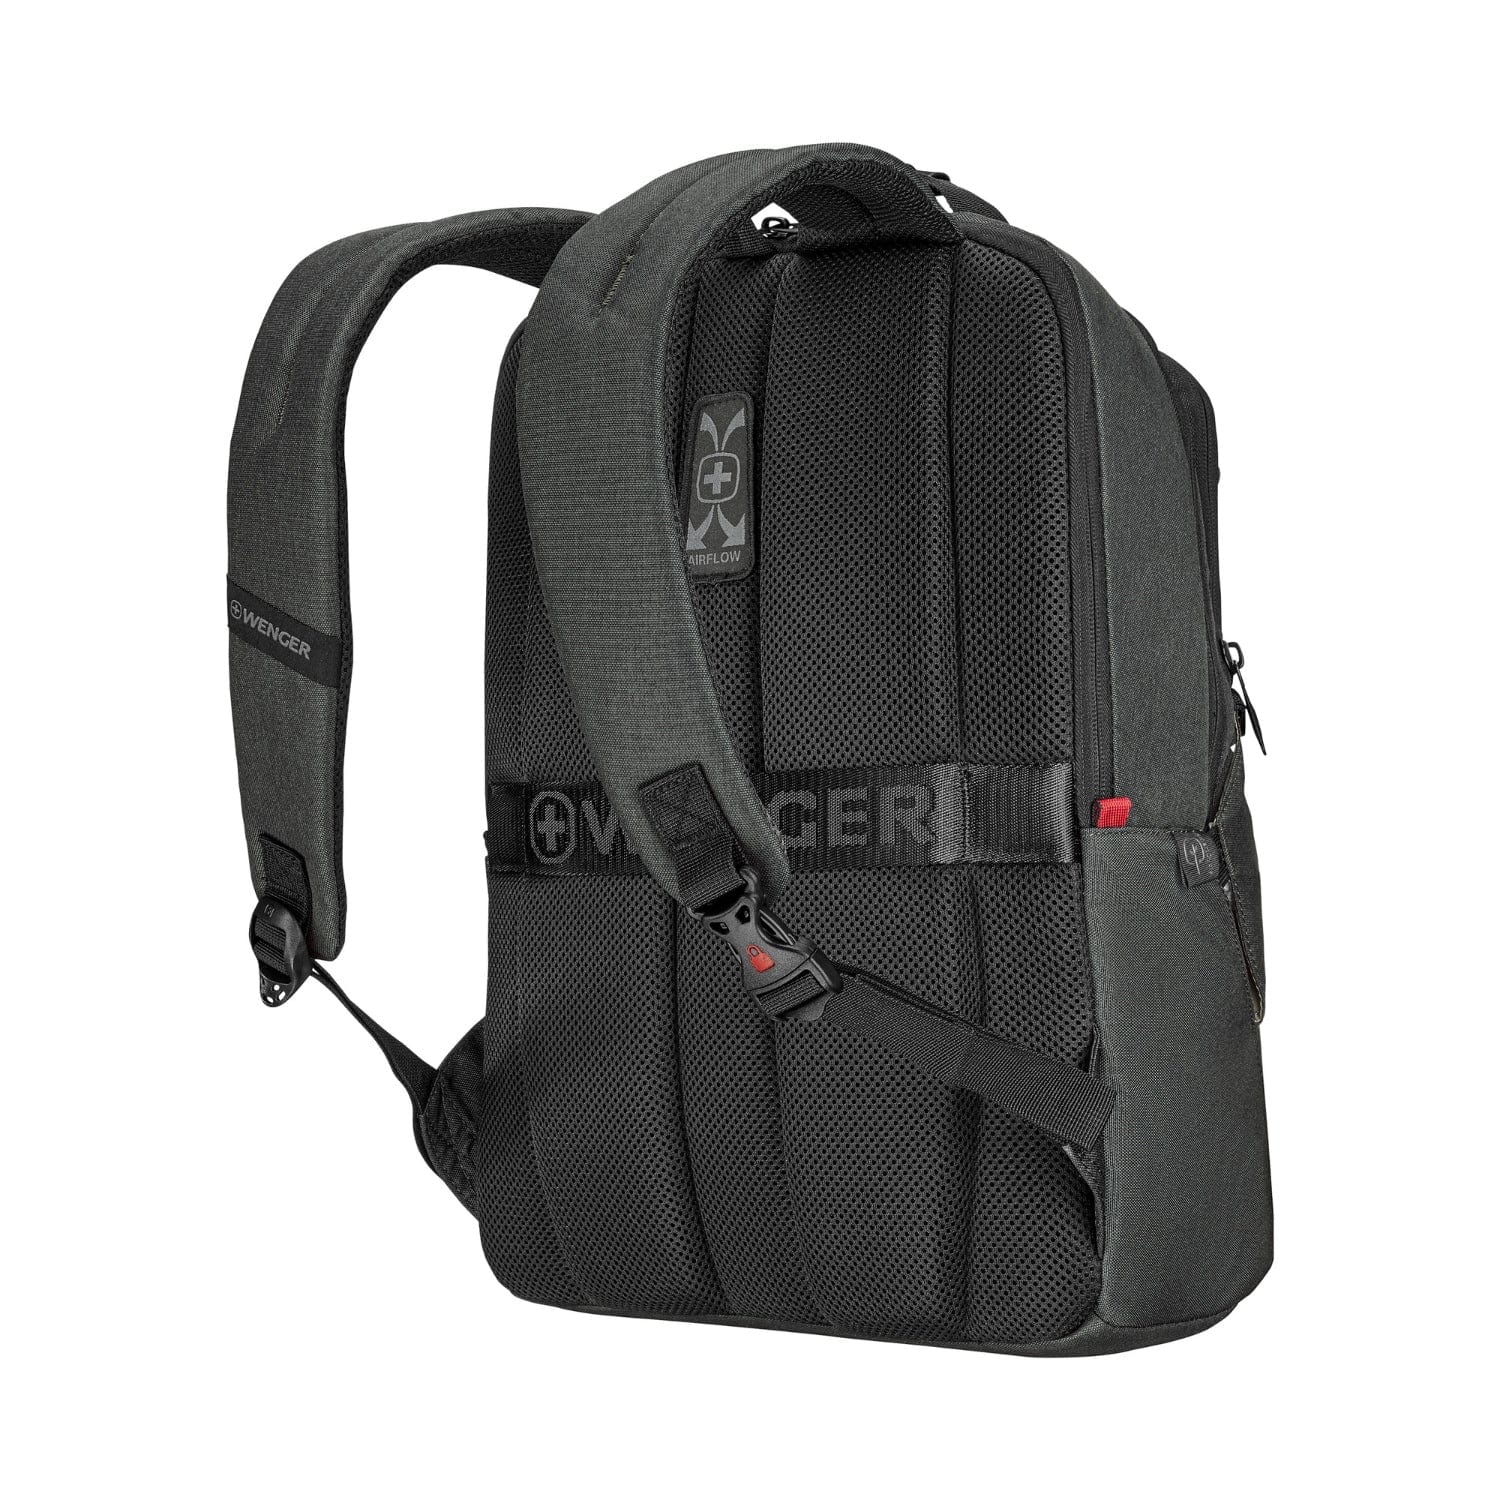 Wenger Mx Eco Professional 16 Laptop Backpack with Tablet Pocket Charcoal - 612261